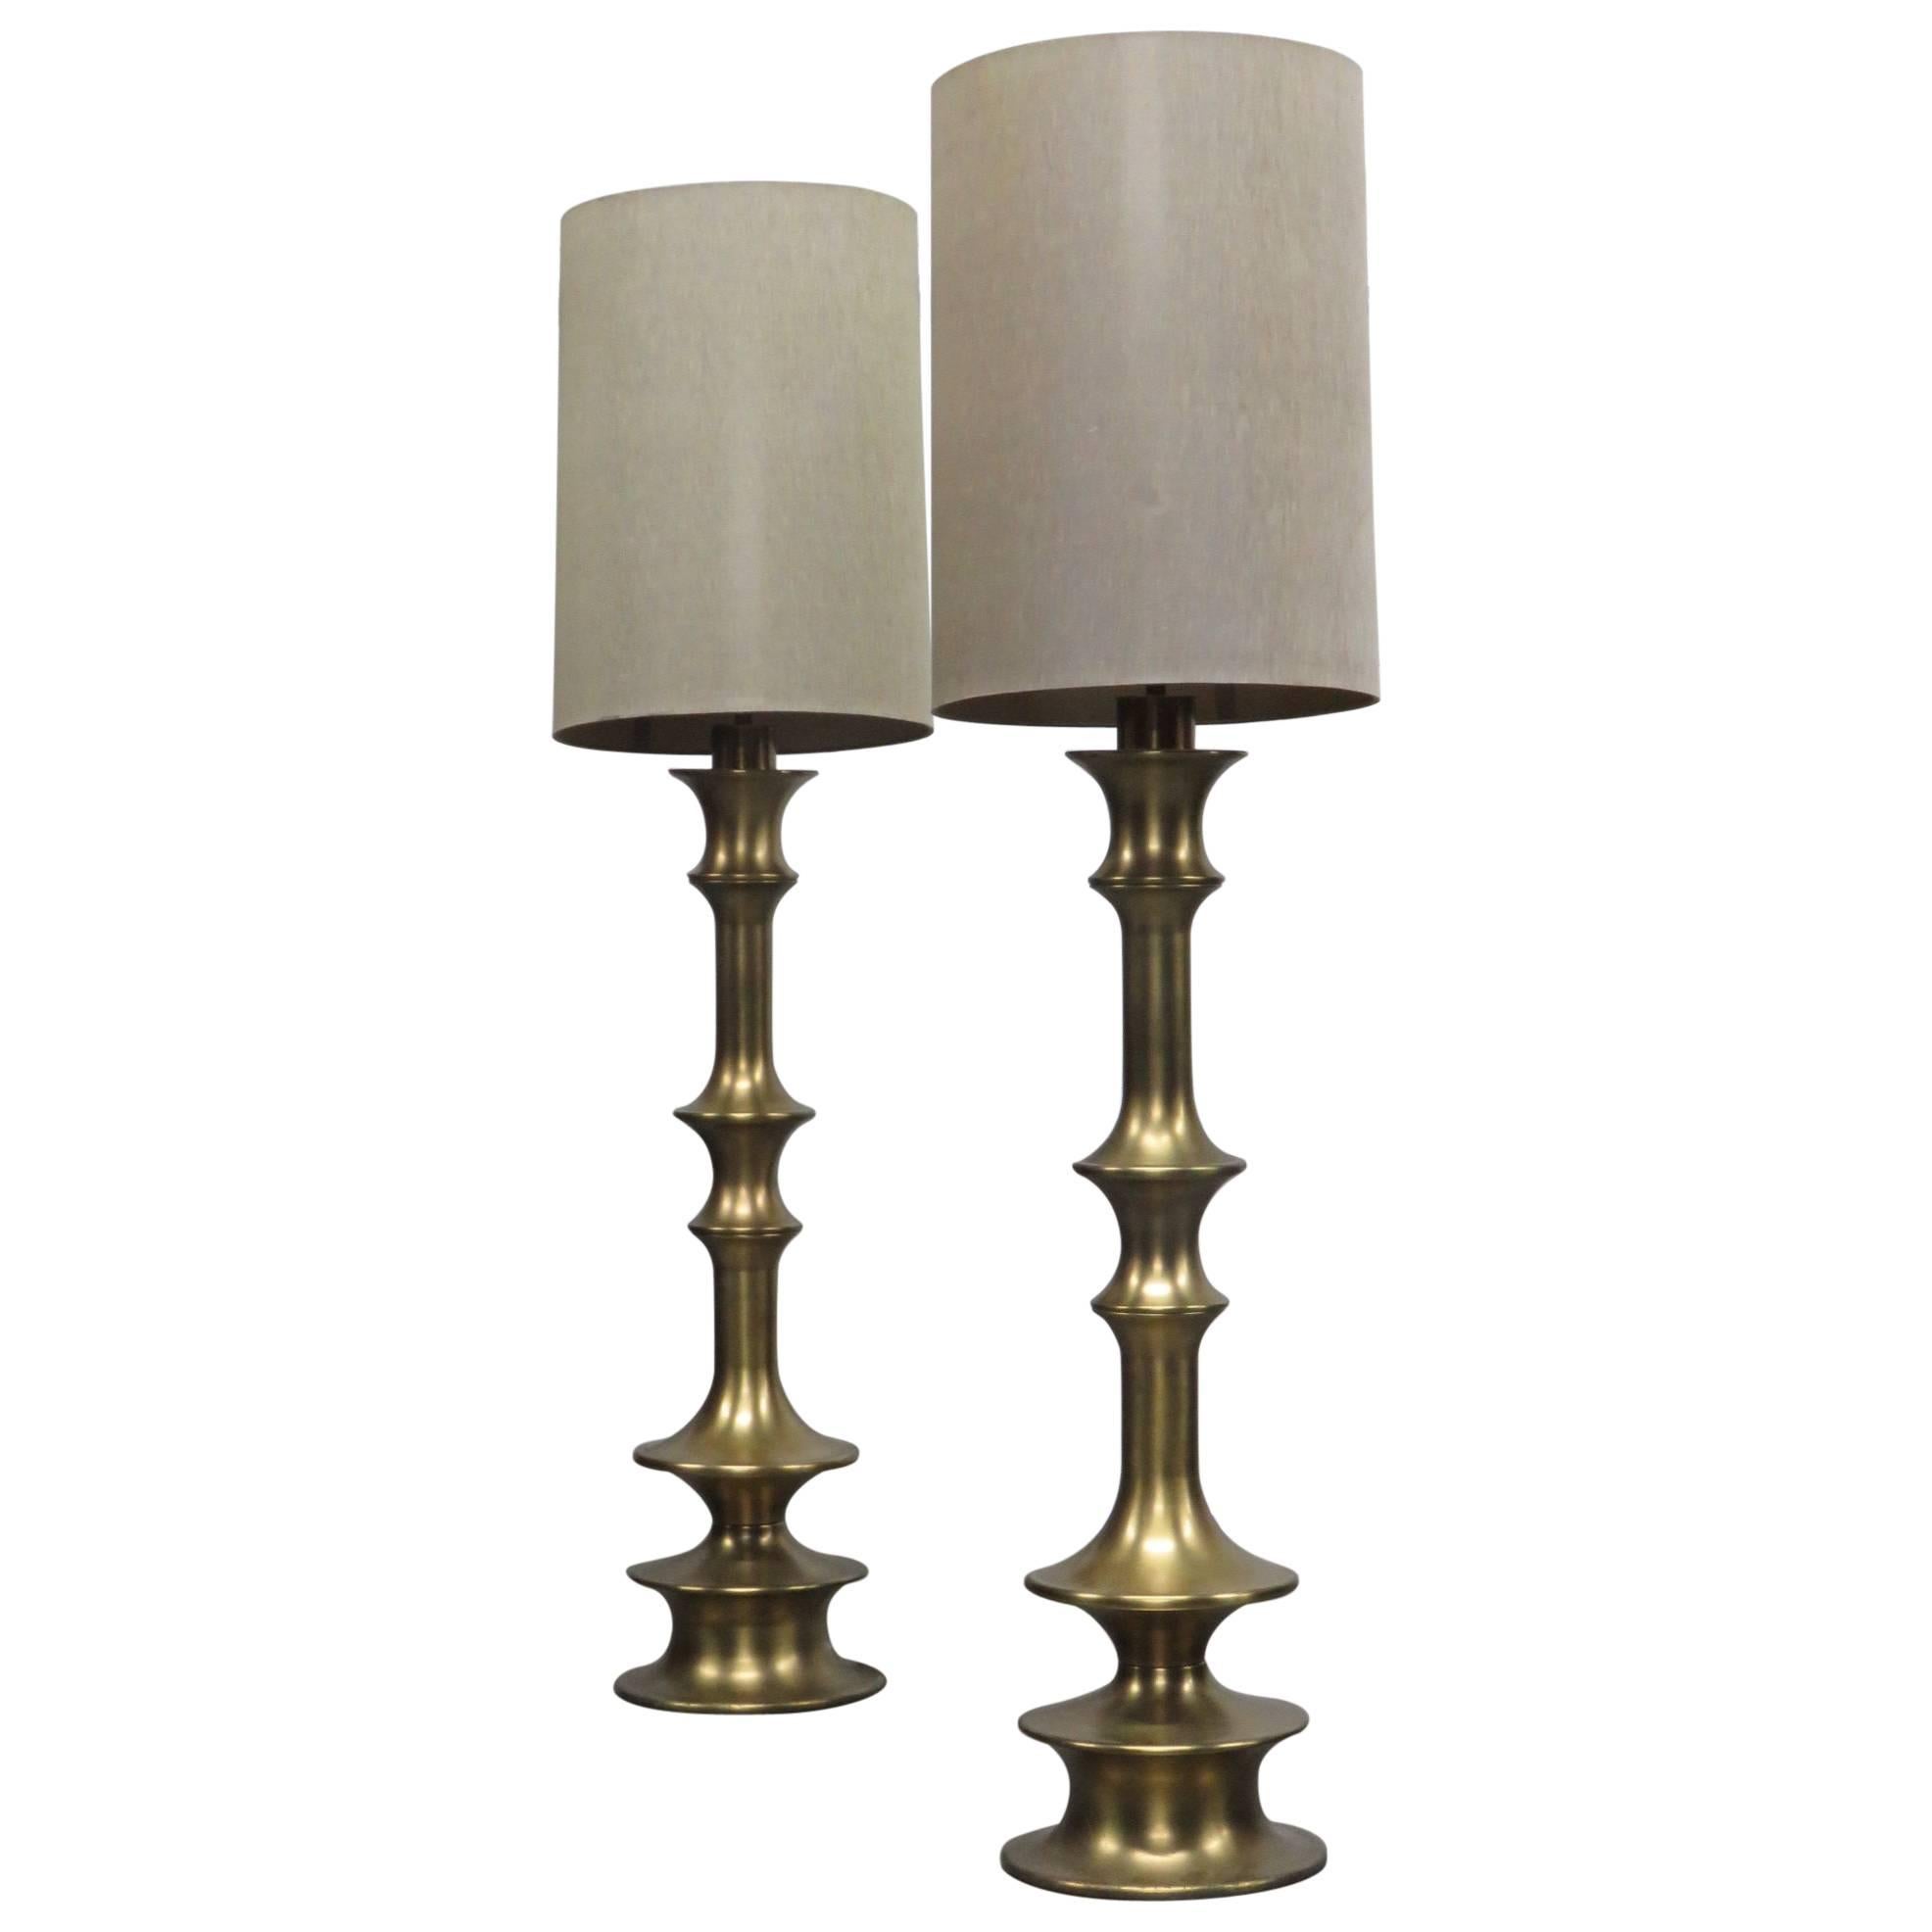 Pair of Tommi Parzinger Style Gilt Lamps